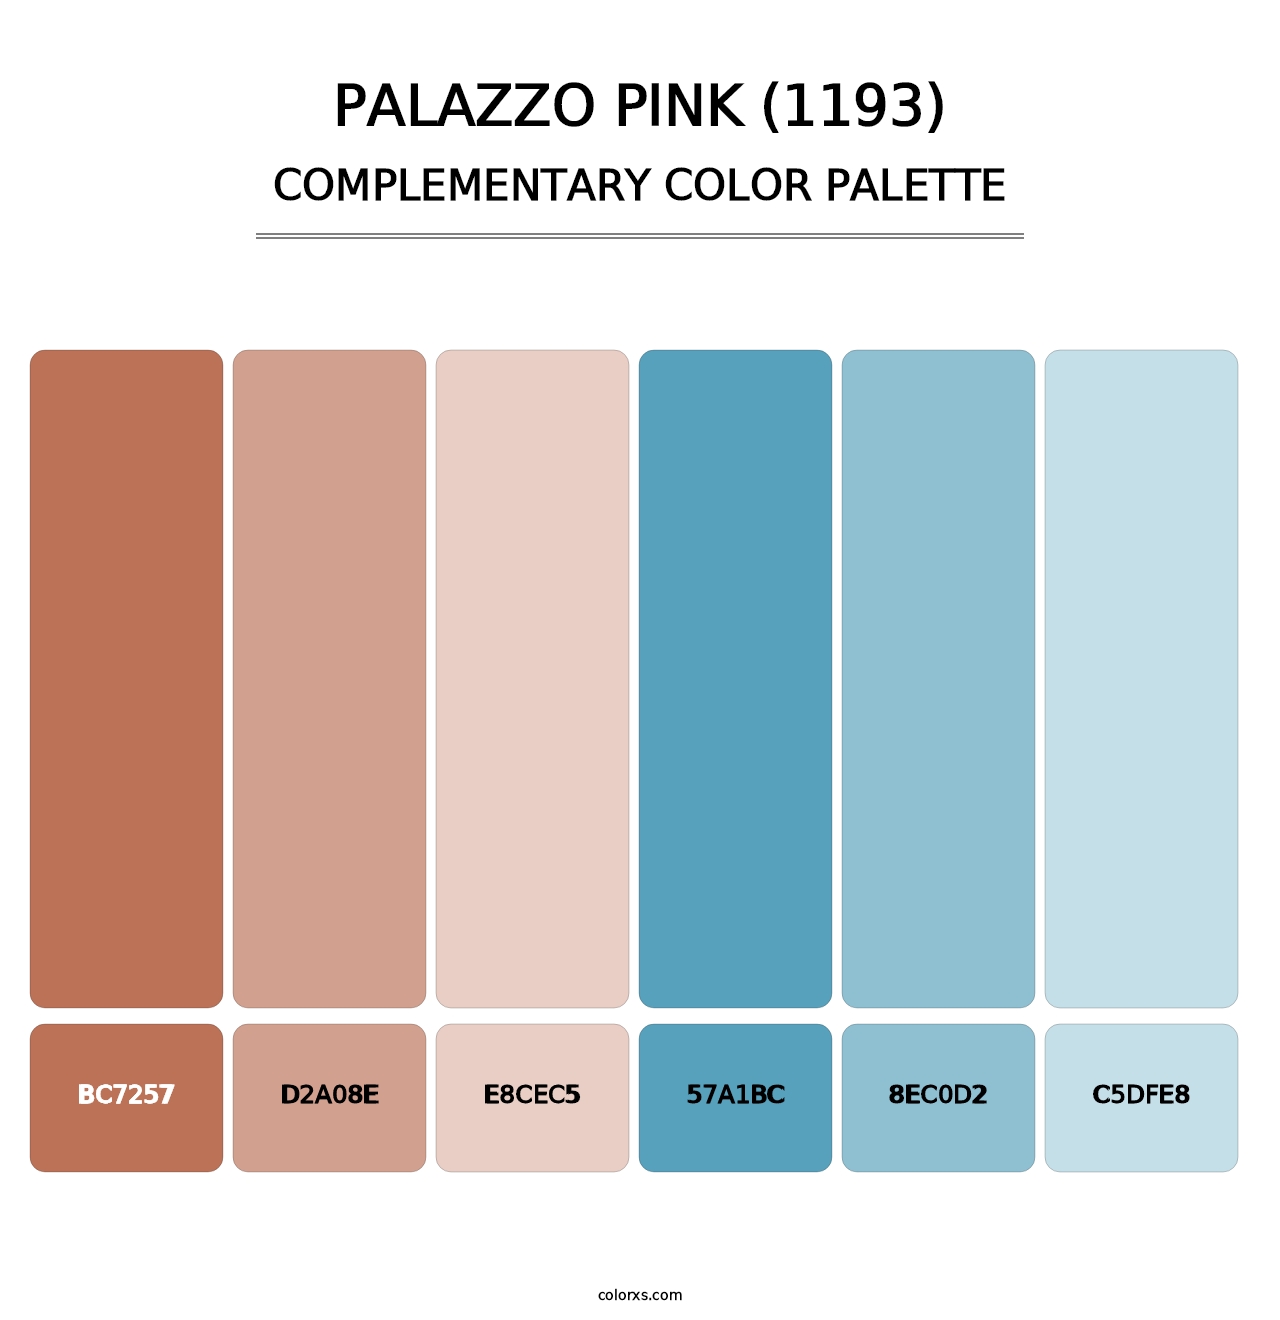 Palazzo Pink (1193) - Complementary Color Palette